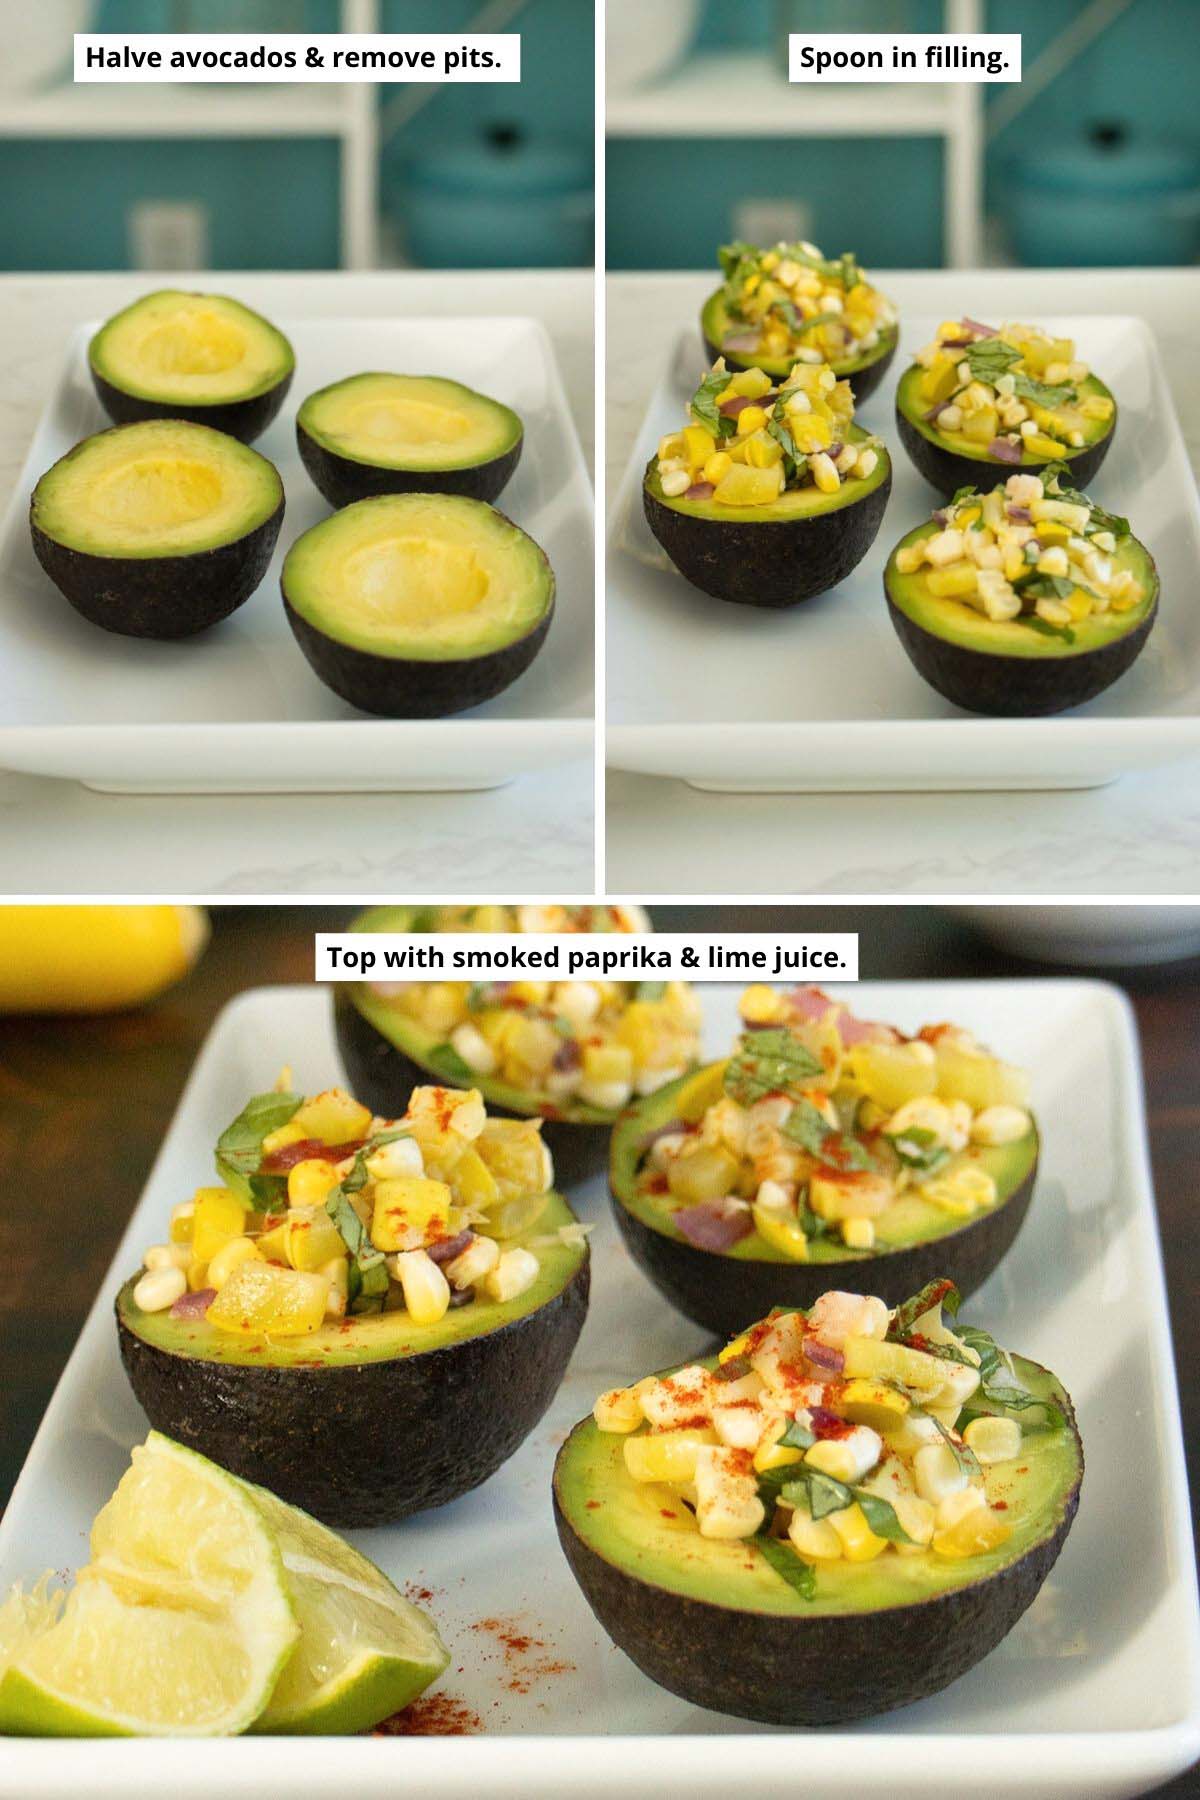 image collage showing halved avocados before and after stuffing and after sprinkling on paprika and lime juice